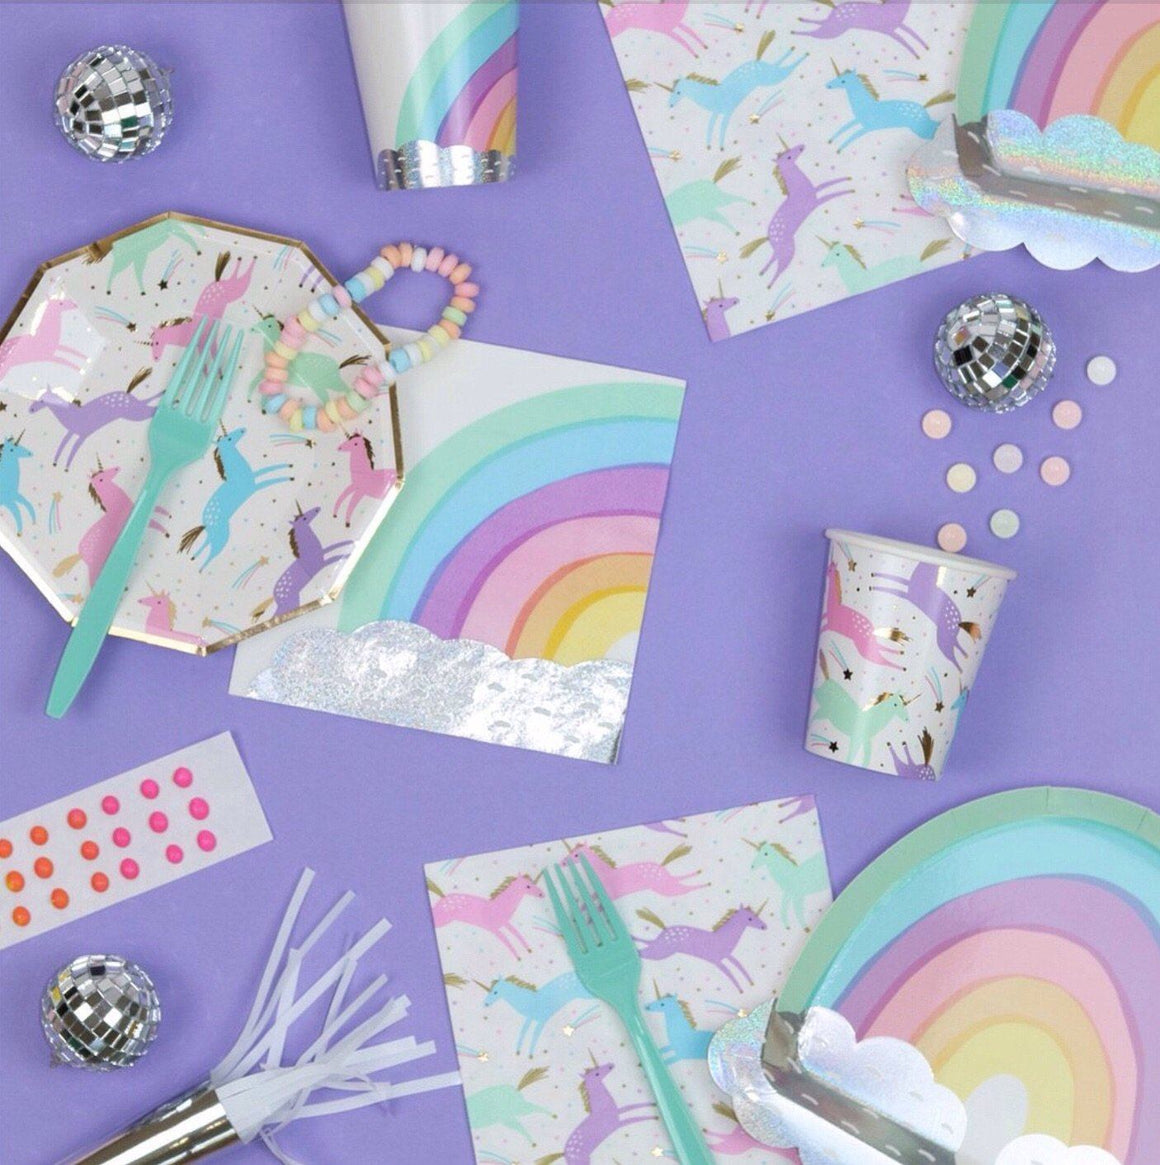 NAPKINS - LARGE DAYDREAM SOCIETY OVER THE RAINBOW, NAPKINS, Daydream Society - Bon + Co. Party Studio